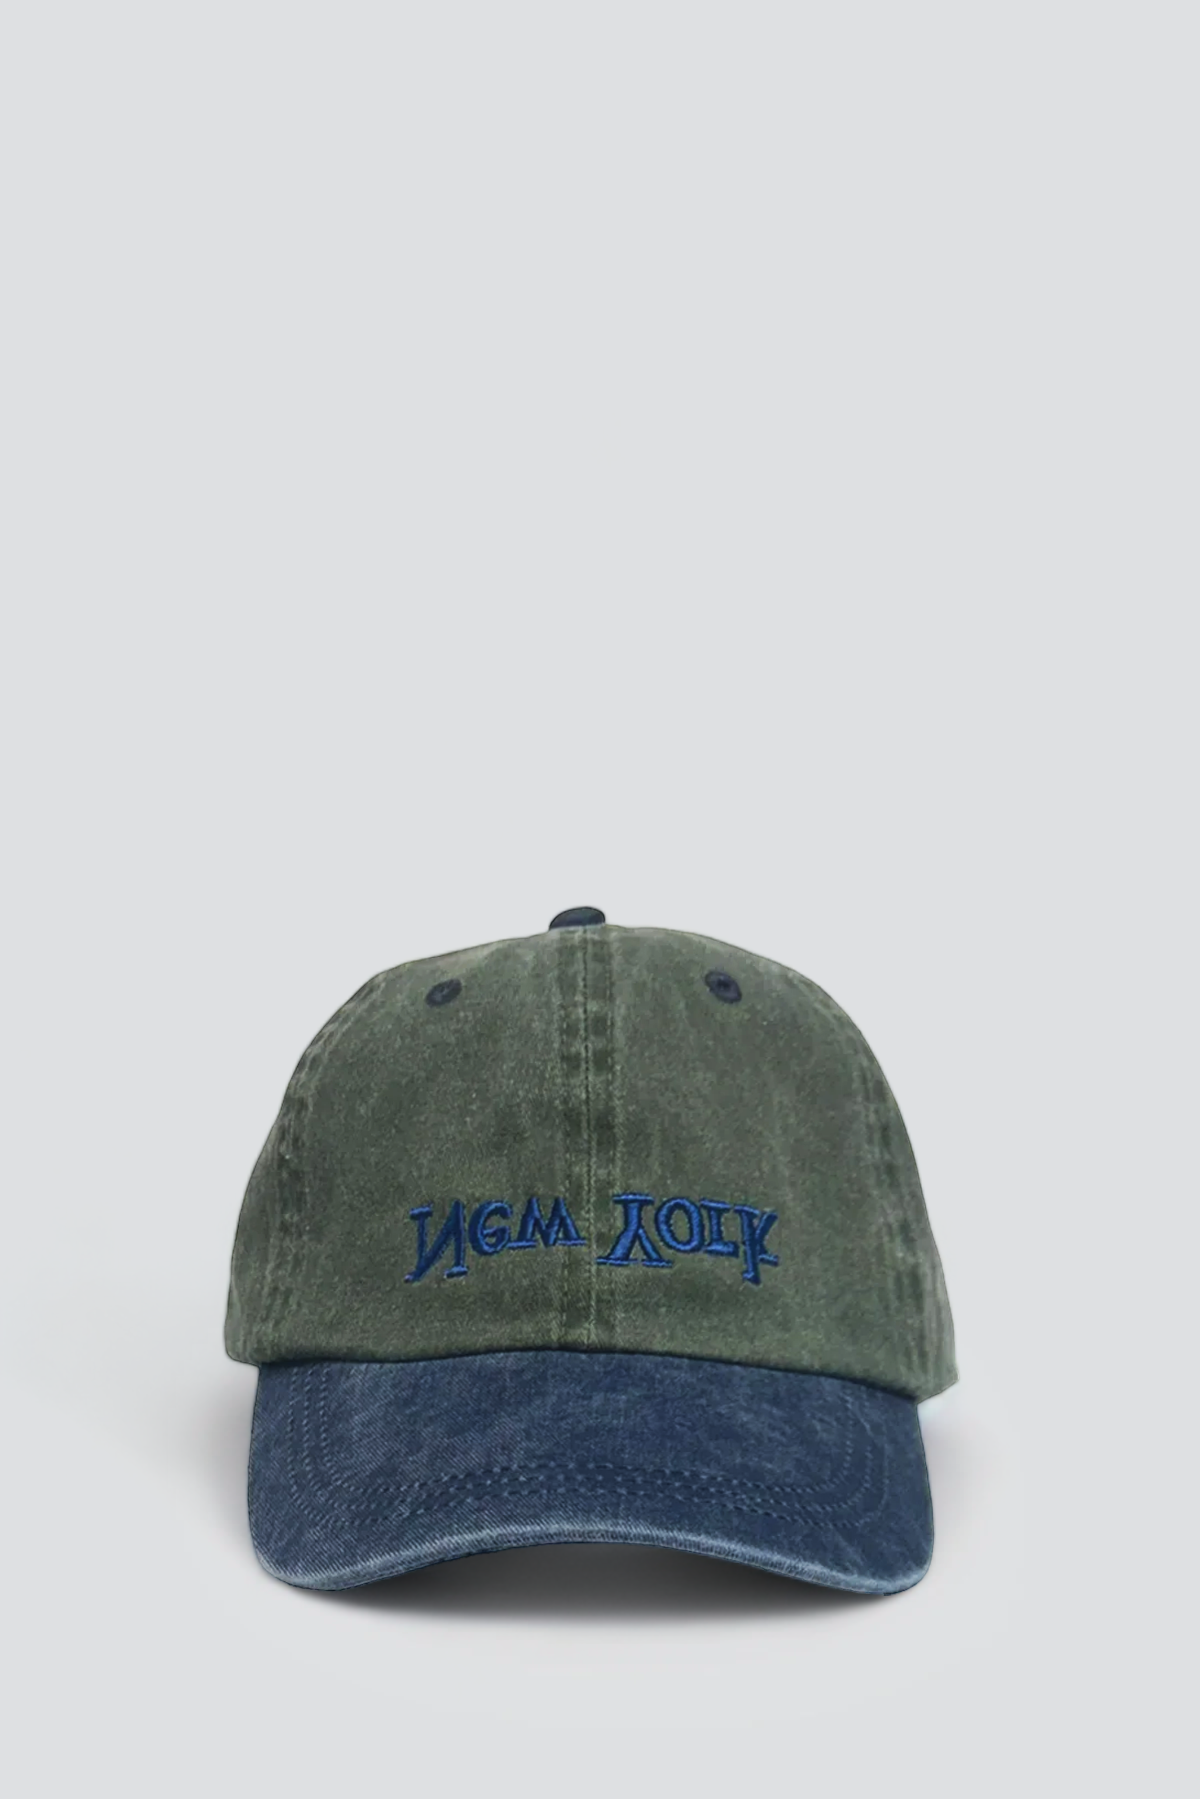 New York Embroidered Hat - Olive/Navy